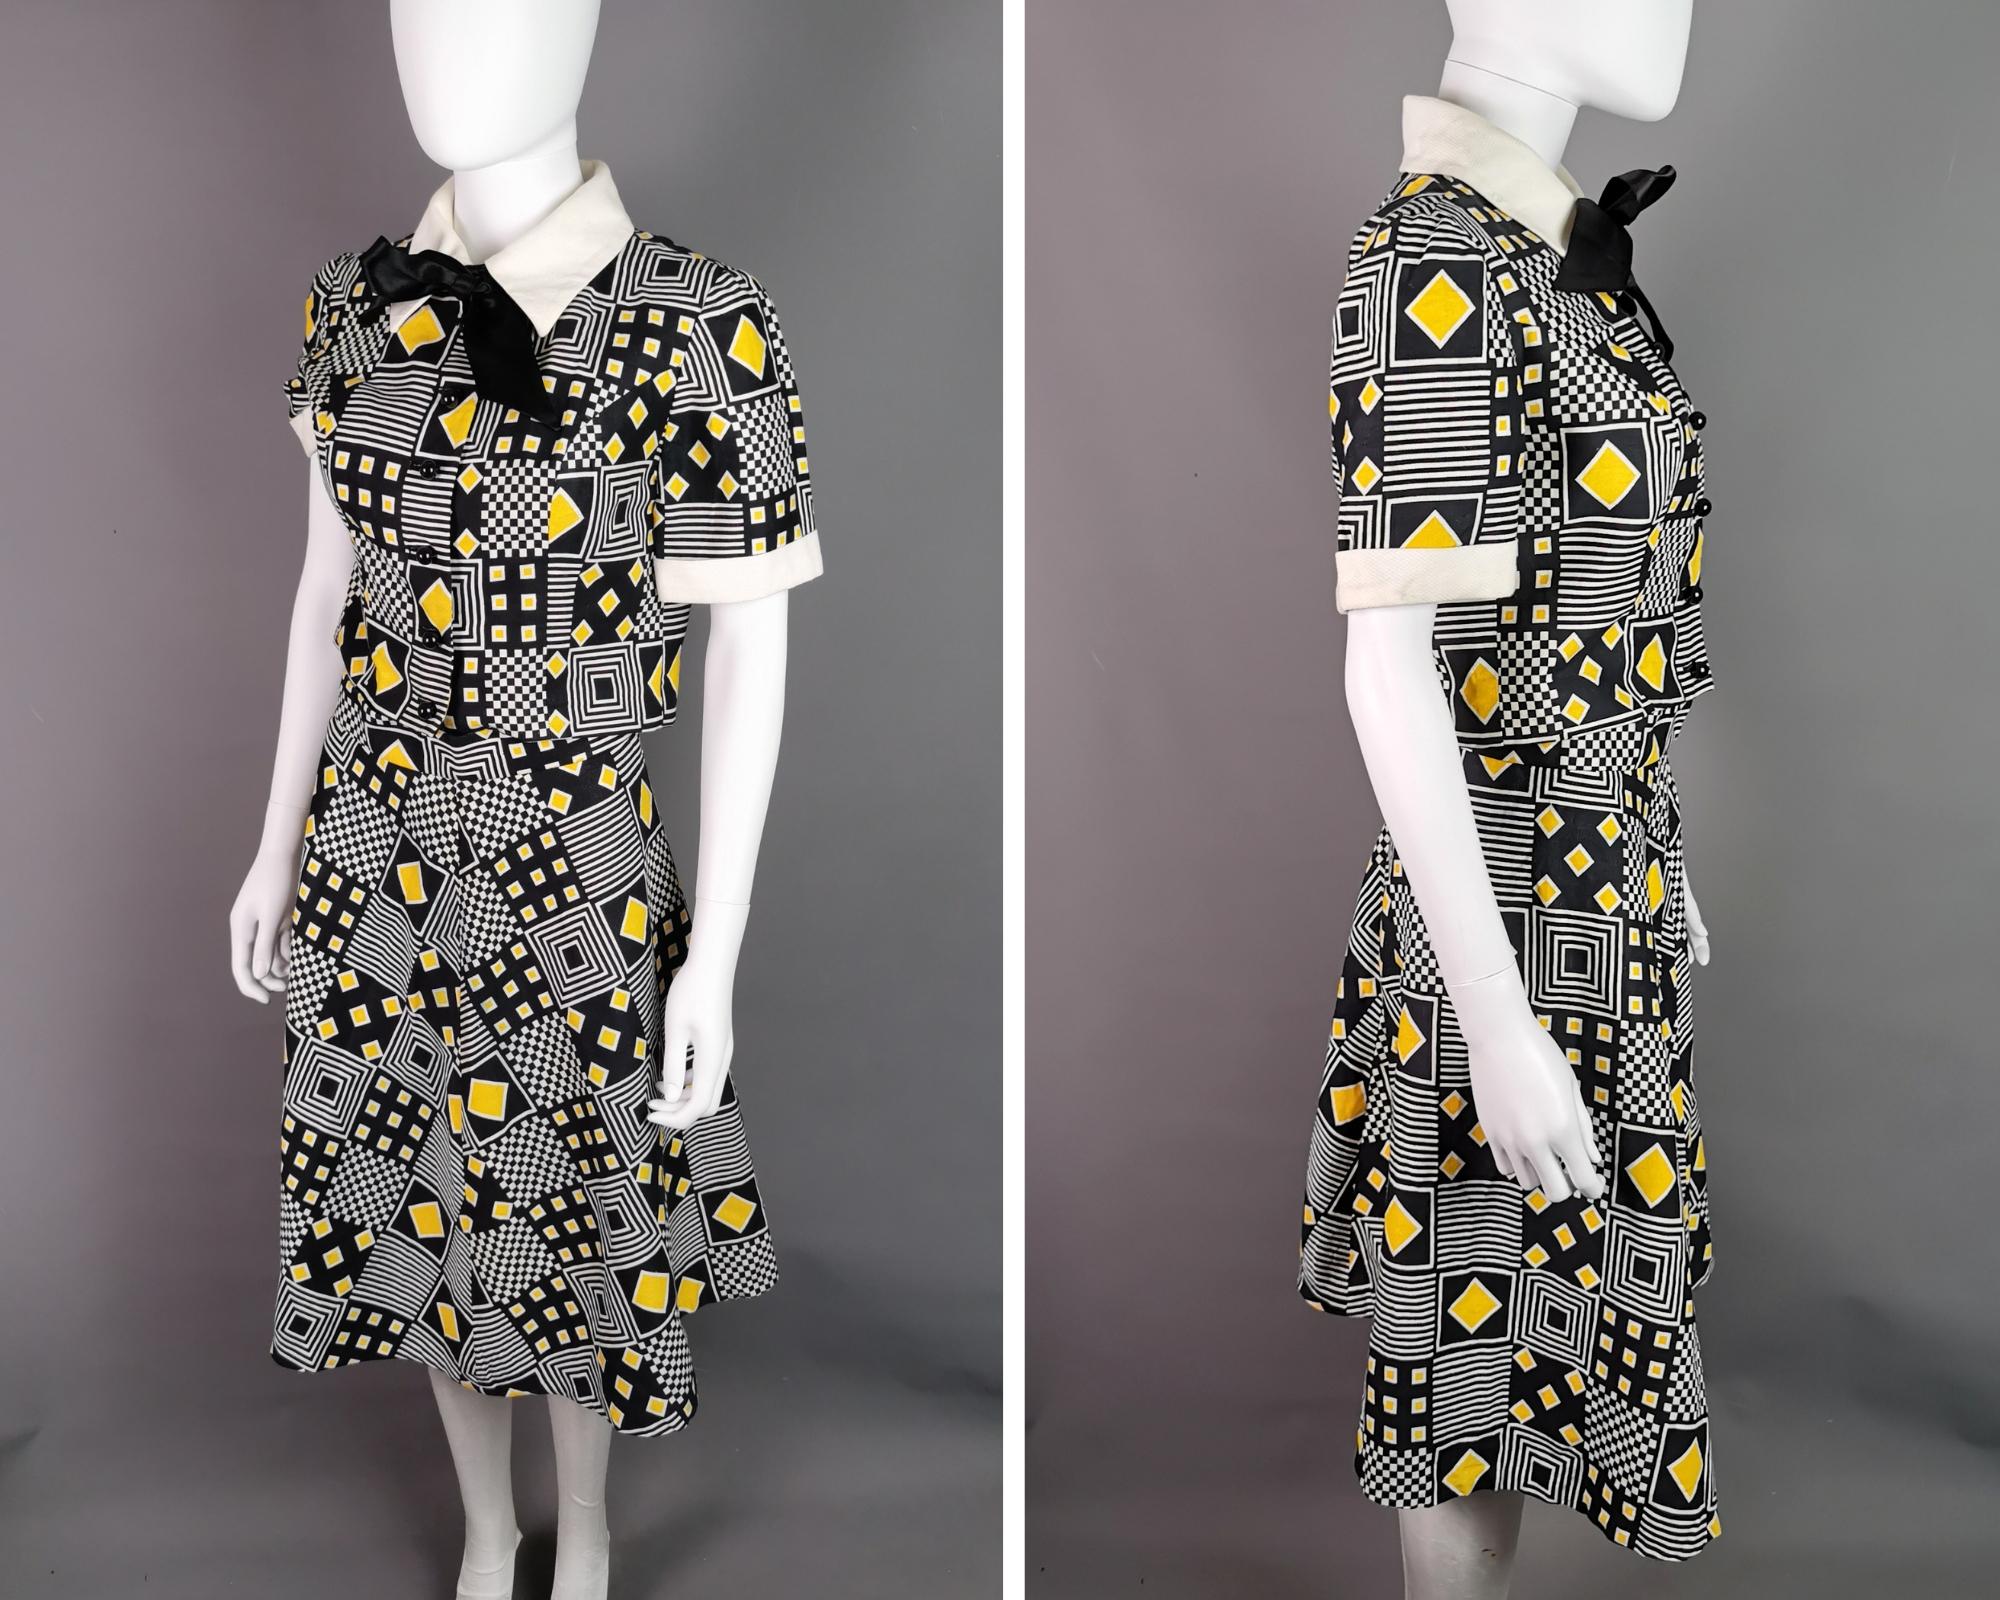 A fab vintage 1980s loud, Abstract print skirt suit / three piece skirt set.

Jazzy monochrome print with vibrant yellow accents.

The blouse has short boxy sleeves, black plastic buttons and is a short length with with a slinky black pussy bow tie